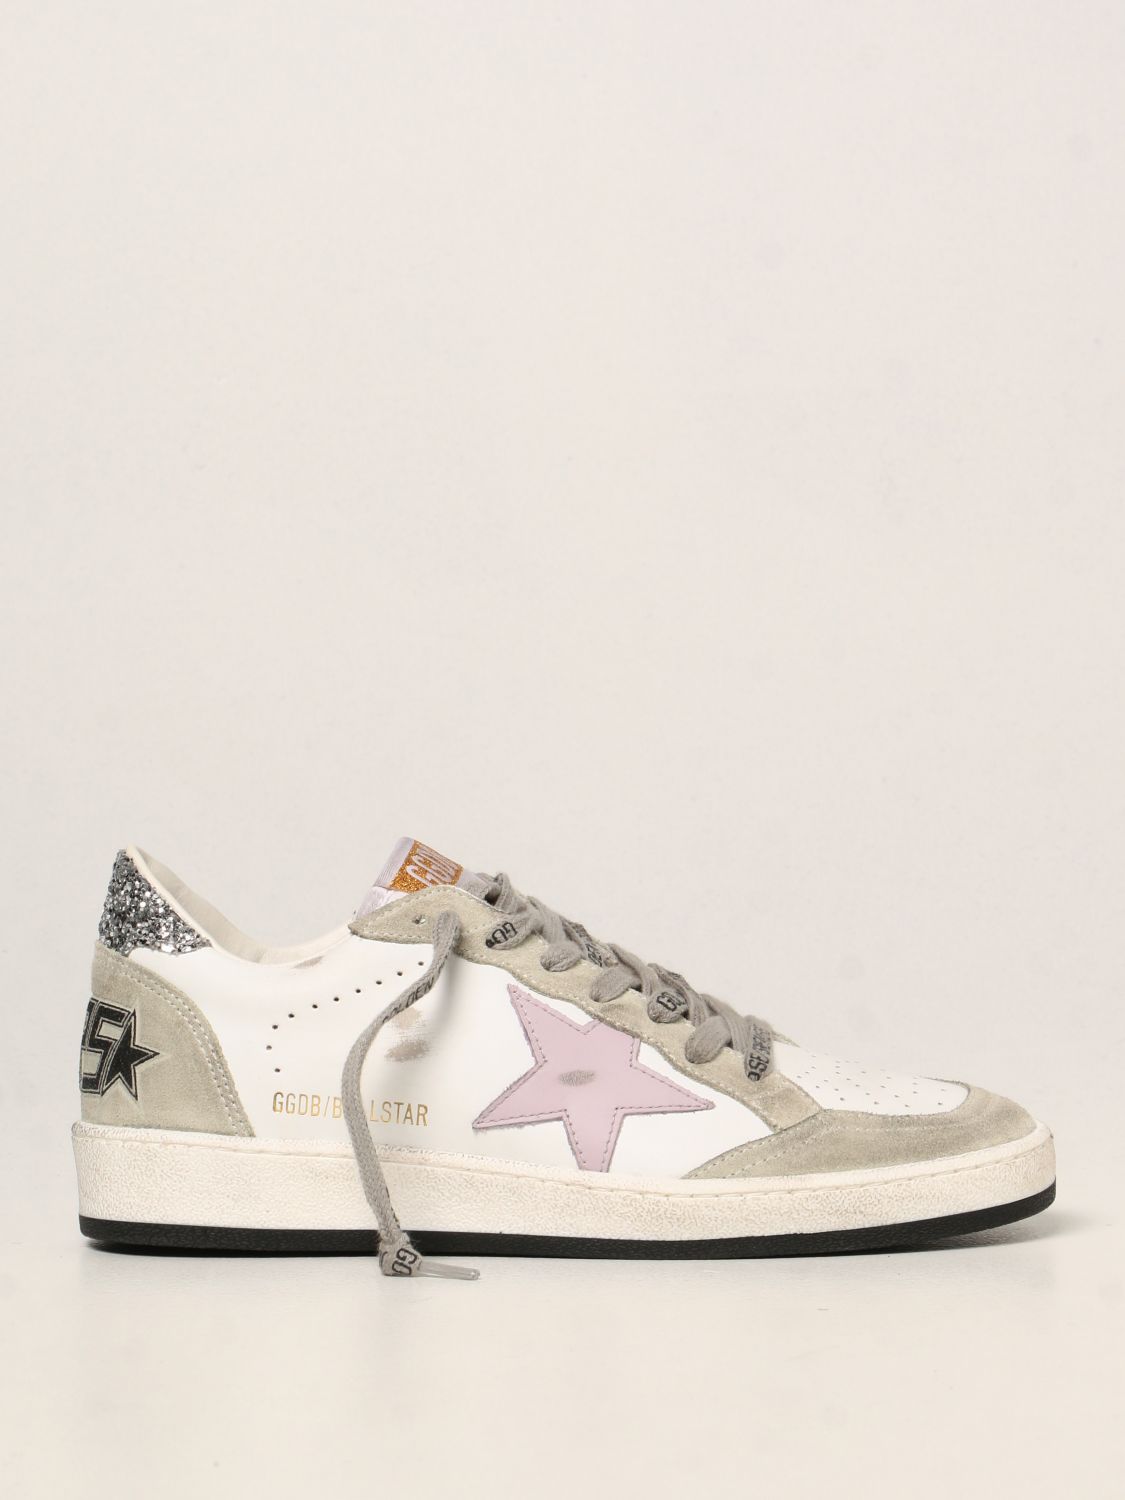 Golden Goose Ball Star Sneakers In Leather In White | ModeSens